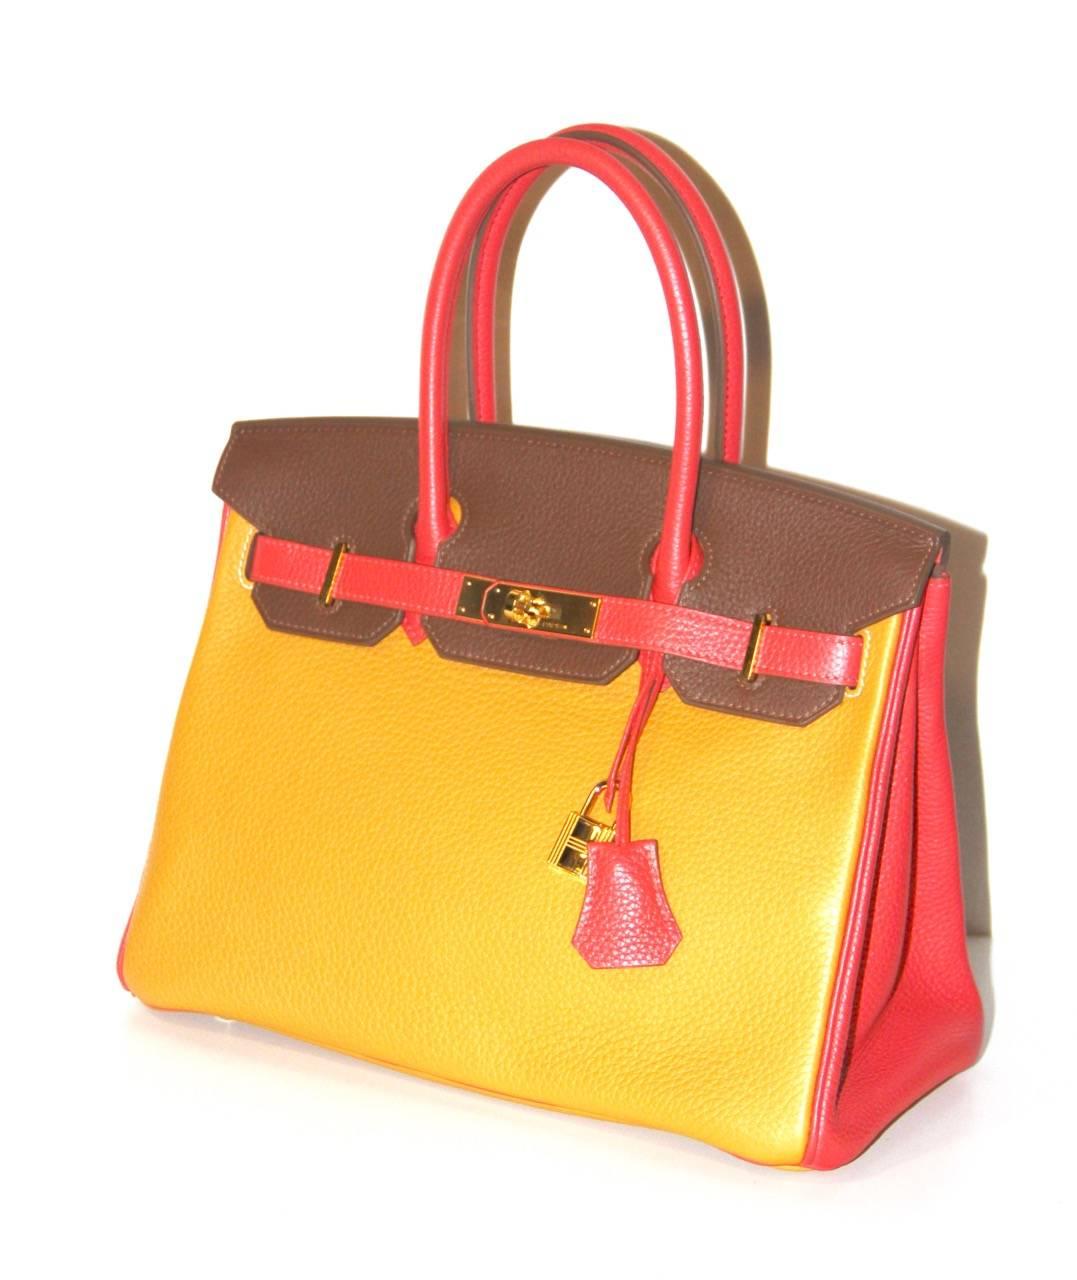 This is a Hermès Birkin HSS 30 CM bag that has been especially made to the specifications of a client.

Collection: 2013 
Leather: Togo
Color: Hermès Pink Bougainvillea, Hermès Yellow Moutarde, Hermès Brown Terre
Hardware: